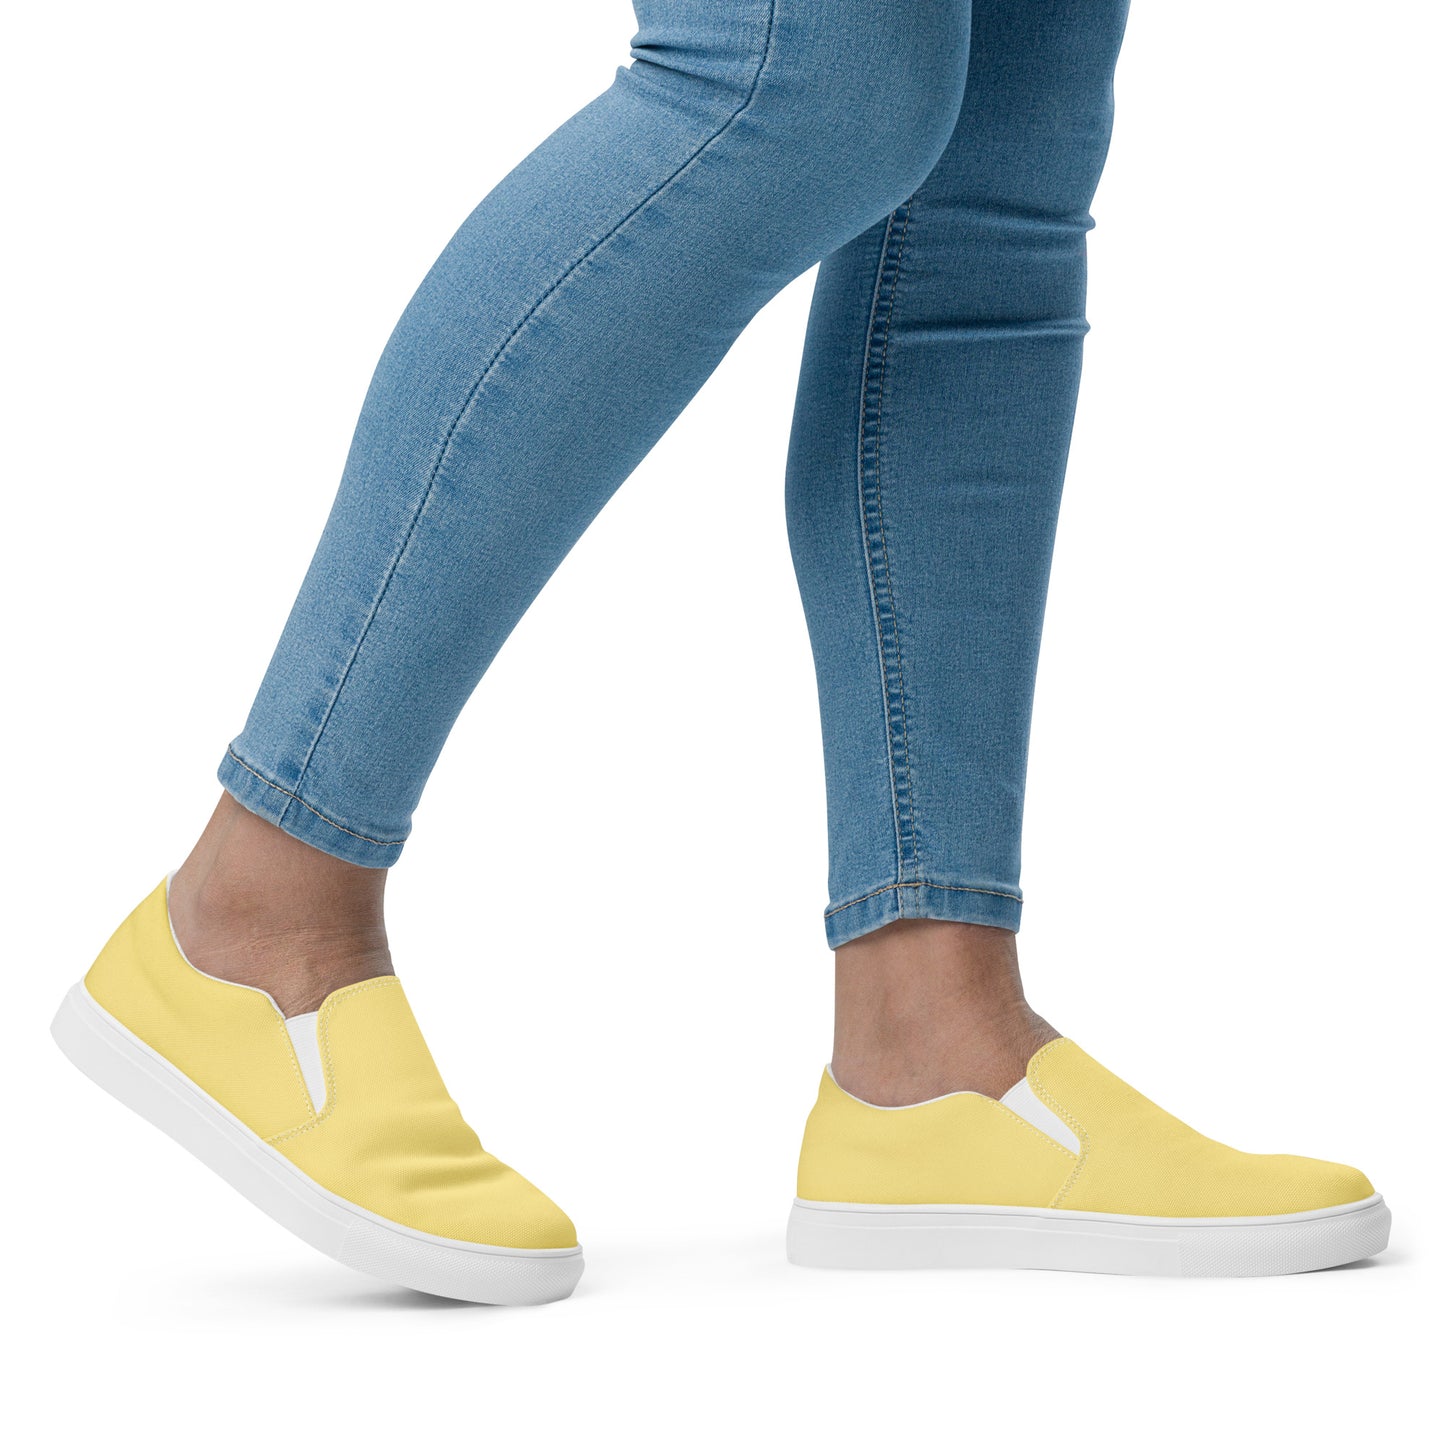 Canary - Sustainably Made Women's  Slip-On Canvas Shoes